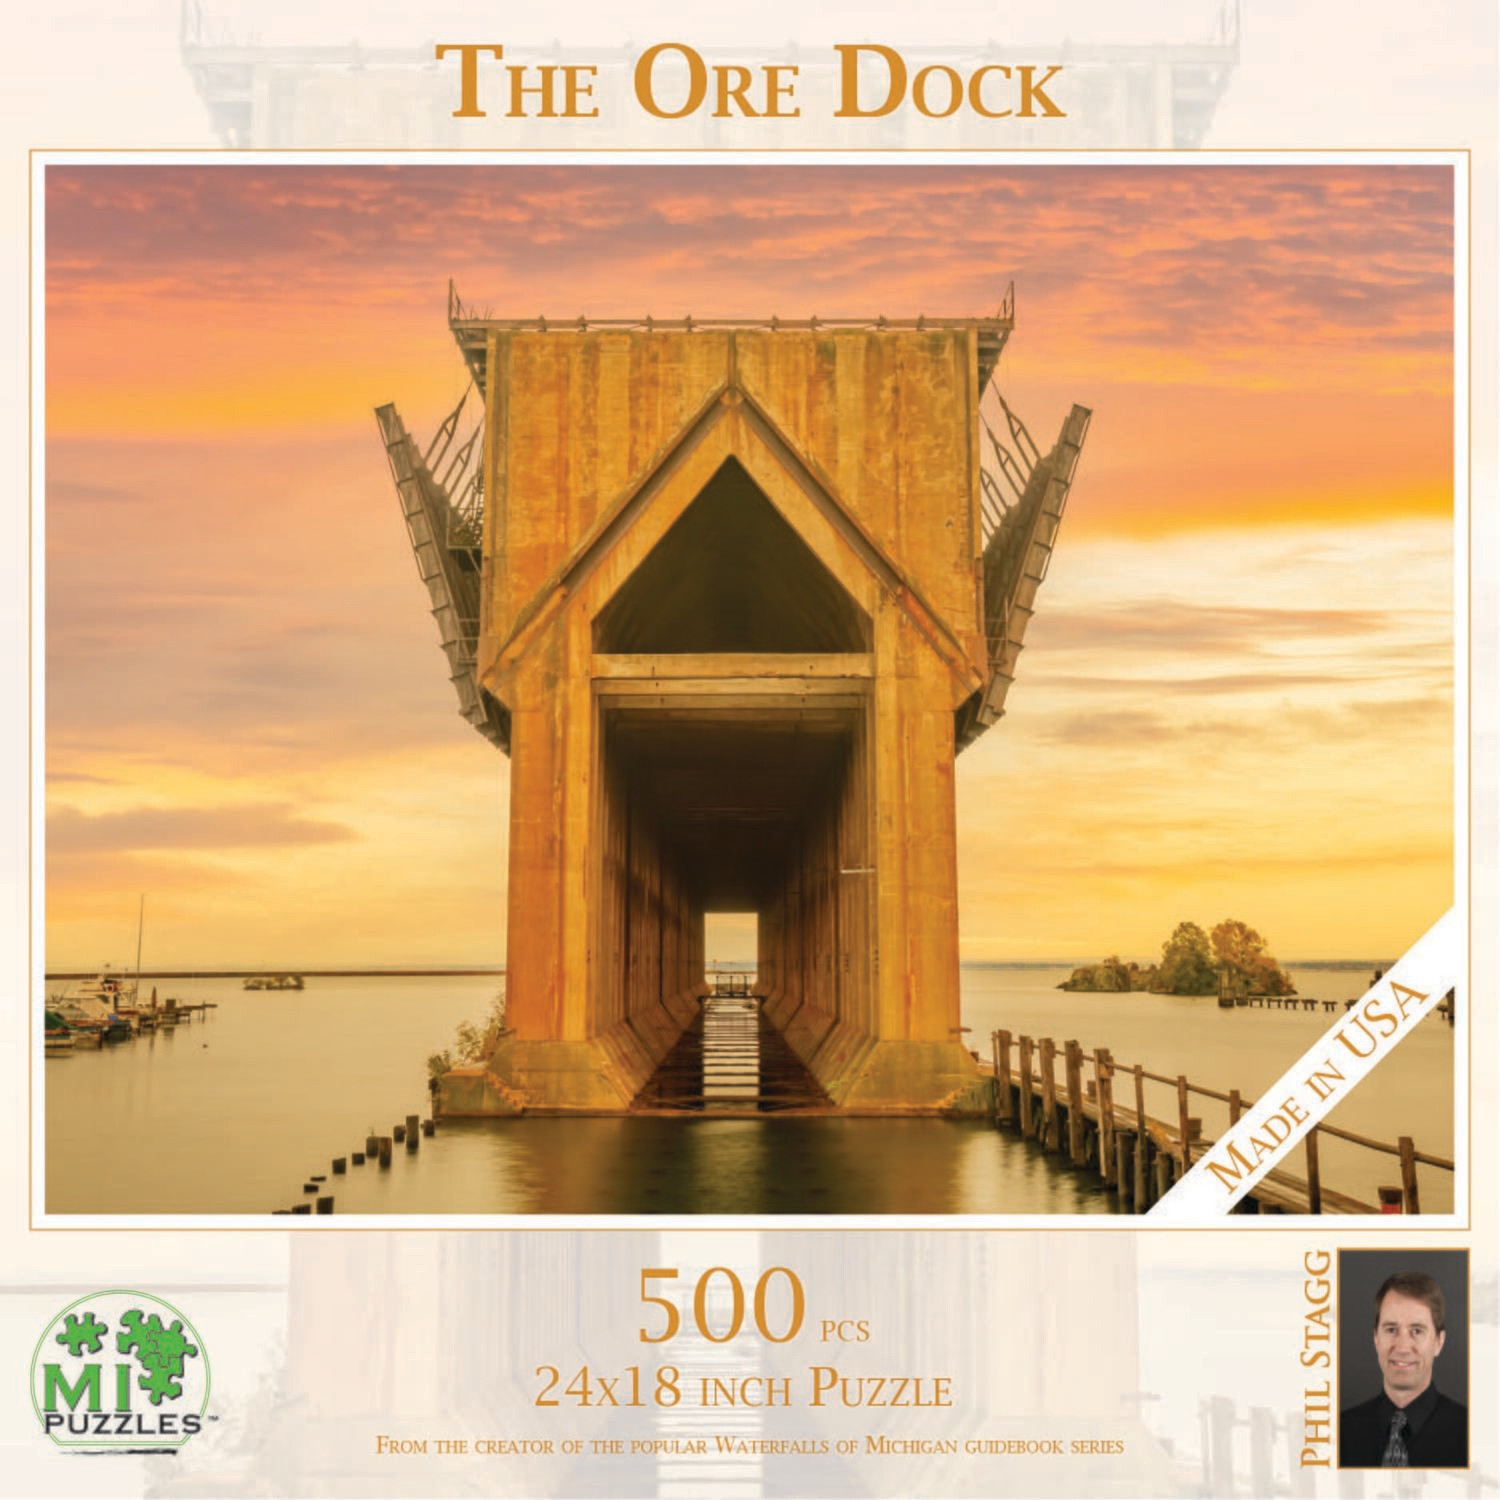 THE ORE DOCK